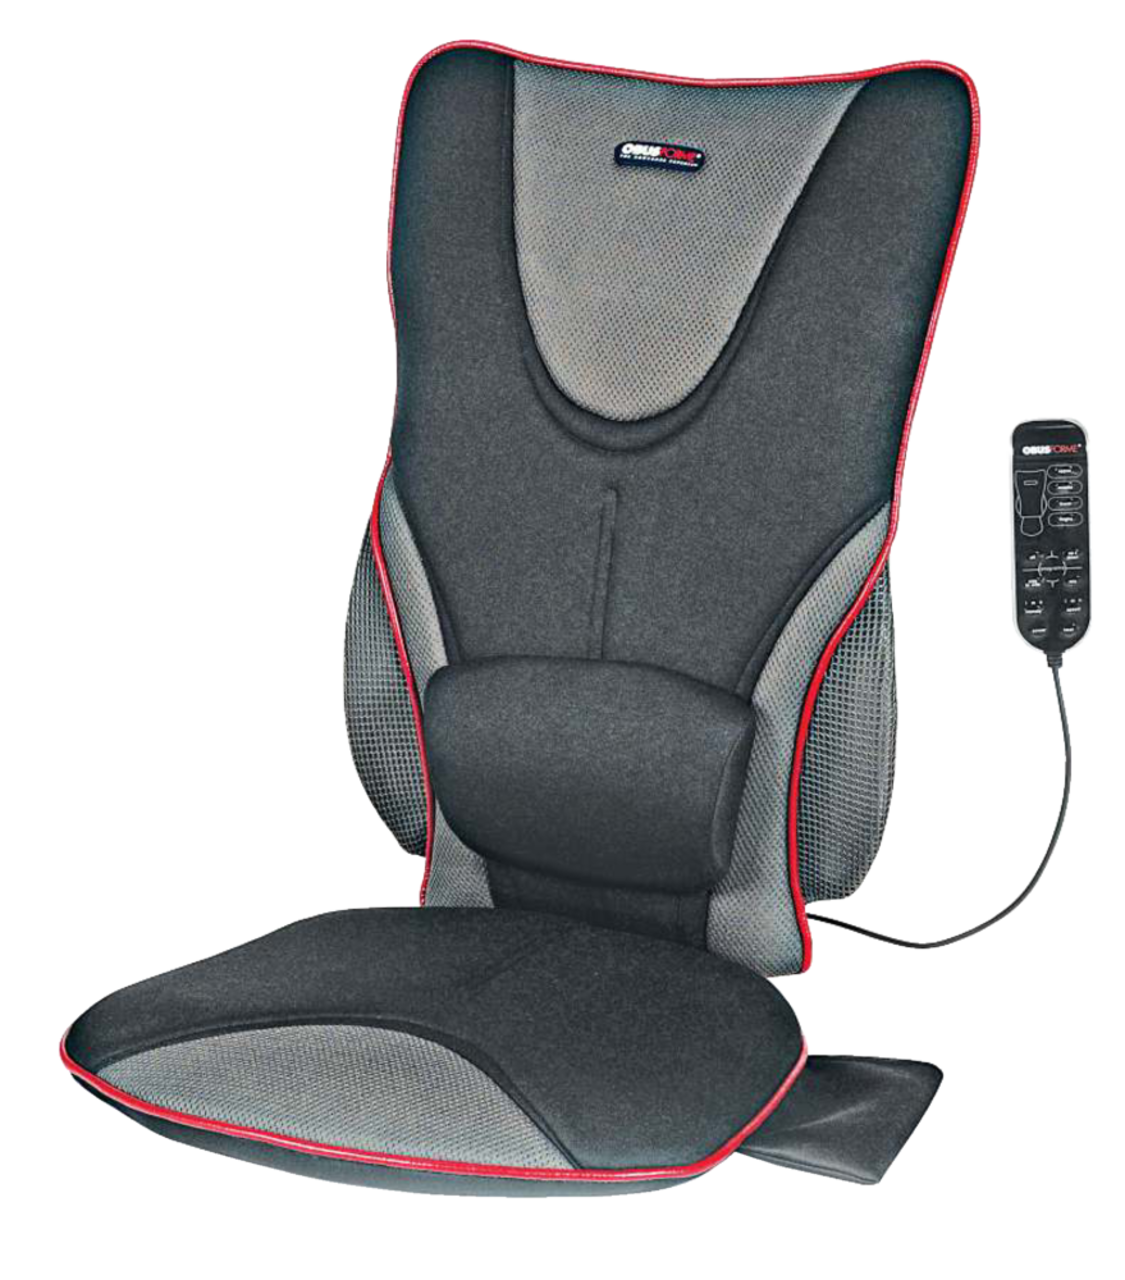 https://media-www.canadiantire.ca/product/automotive/car-care-accessories/auto-comfort/0321488/obus-forme-8-motor-massage-seat-cushion-bb1bbe49-f233-451d-8529-6a83ded86d20.png?imdensity=1&imwidth=640&impolicy=mZoom